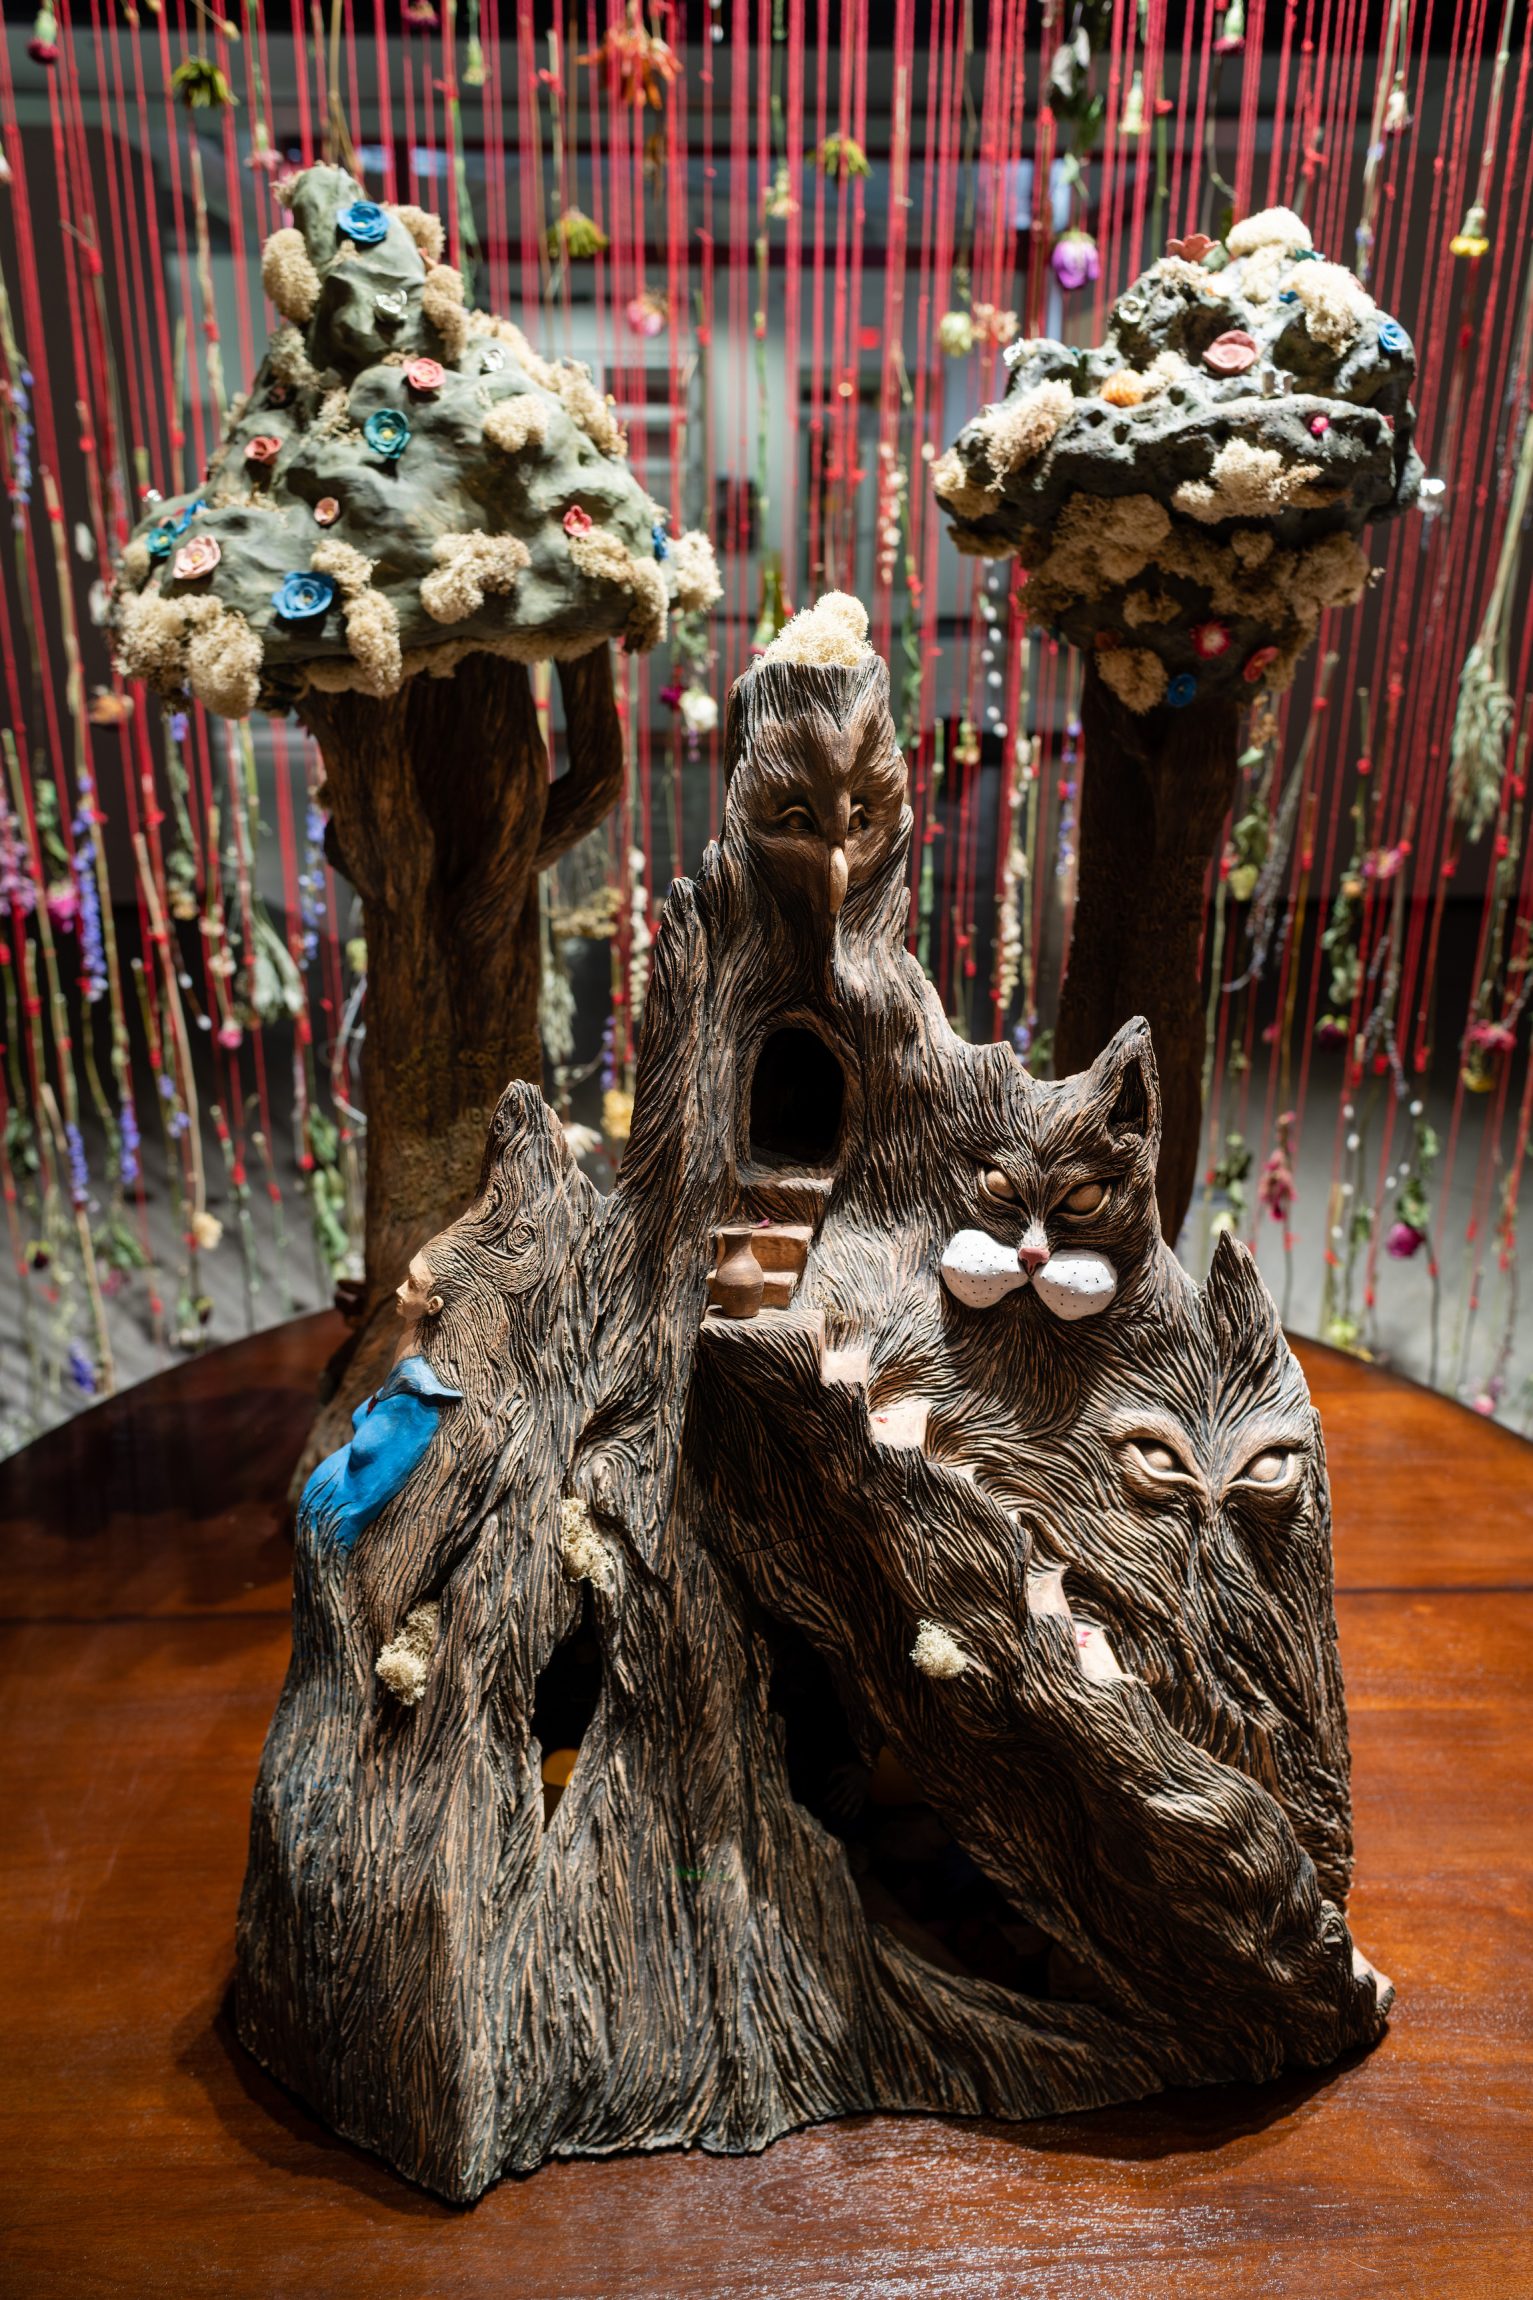 Ceramic sculpture art from Gloriann Langva's Master of Fine Arts exhibition Illusive Charm: Tales of Magic and Dreams at the Art Lofts Gallery, University of Wisconsin-Madison. Photography by Kyle Herrera.